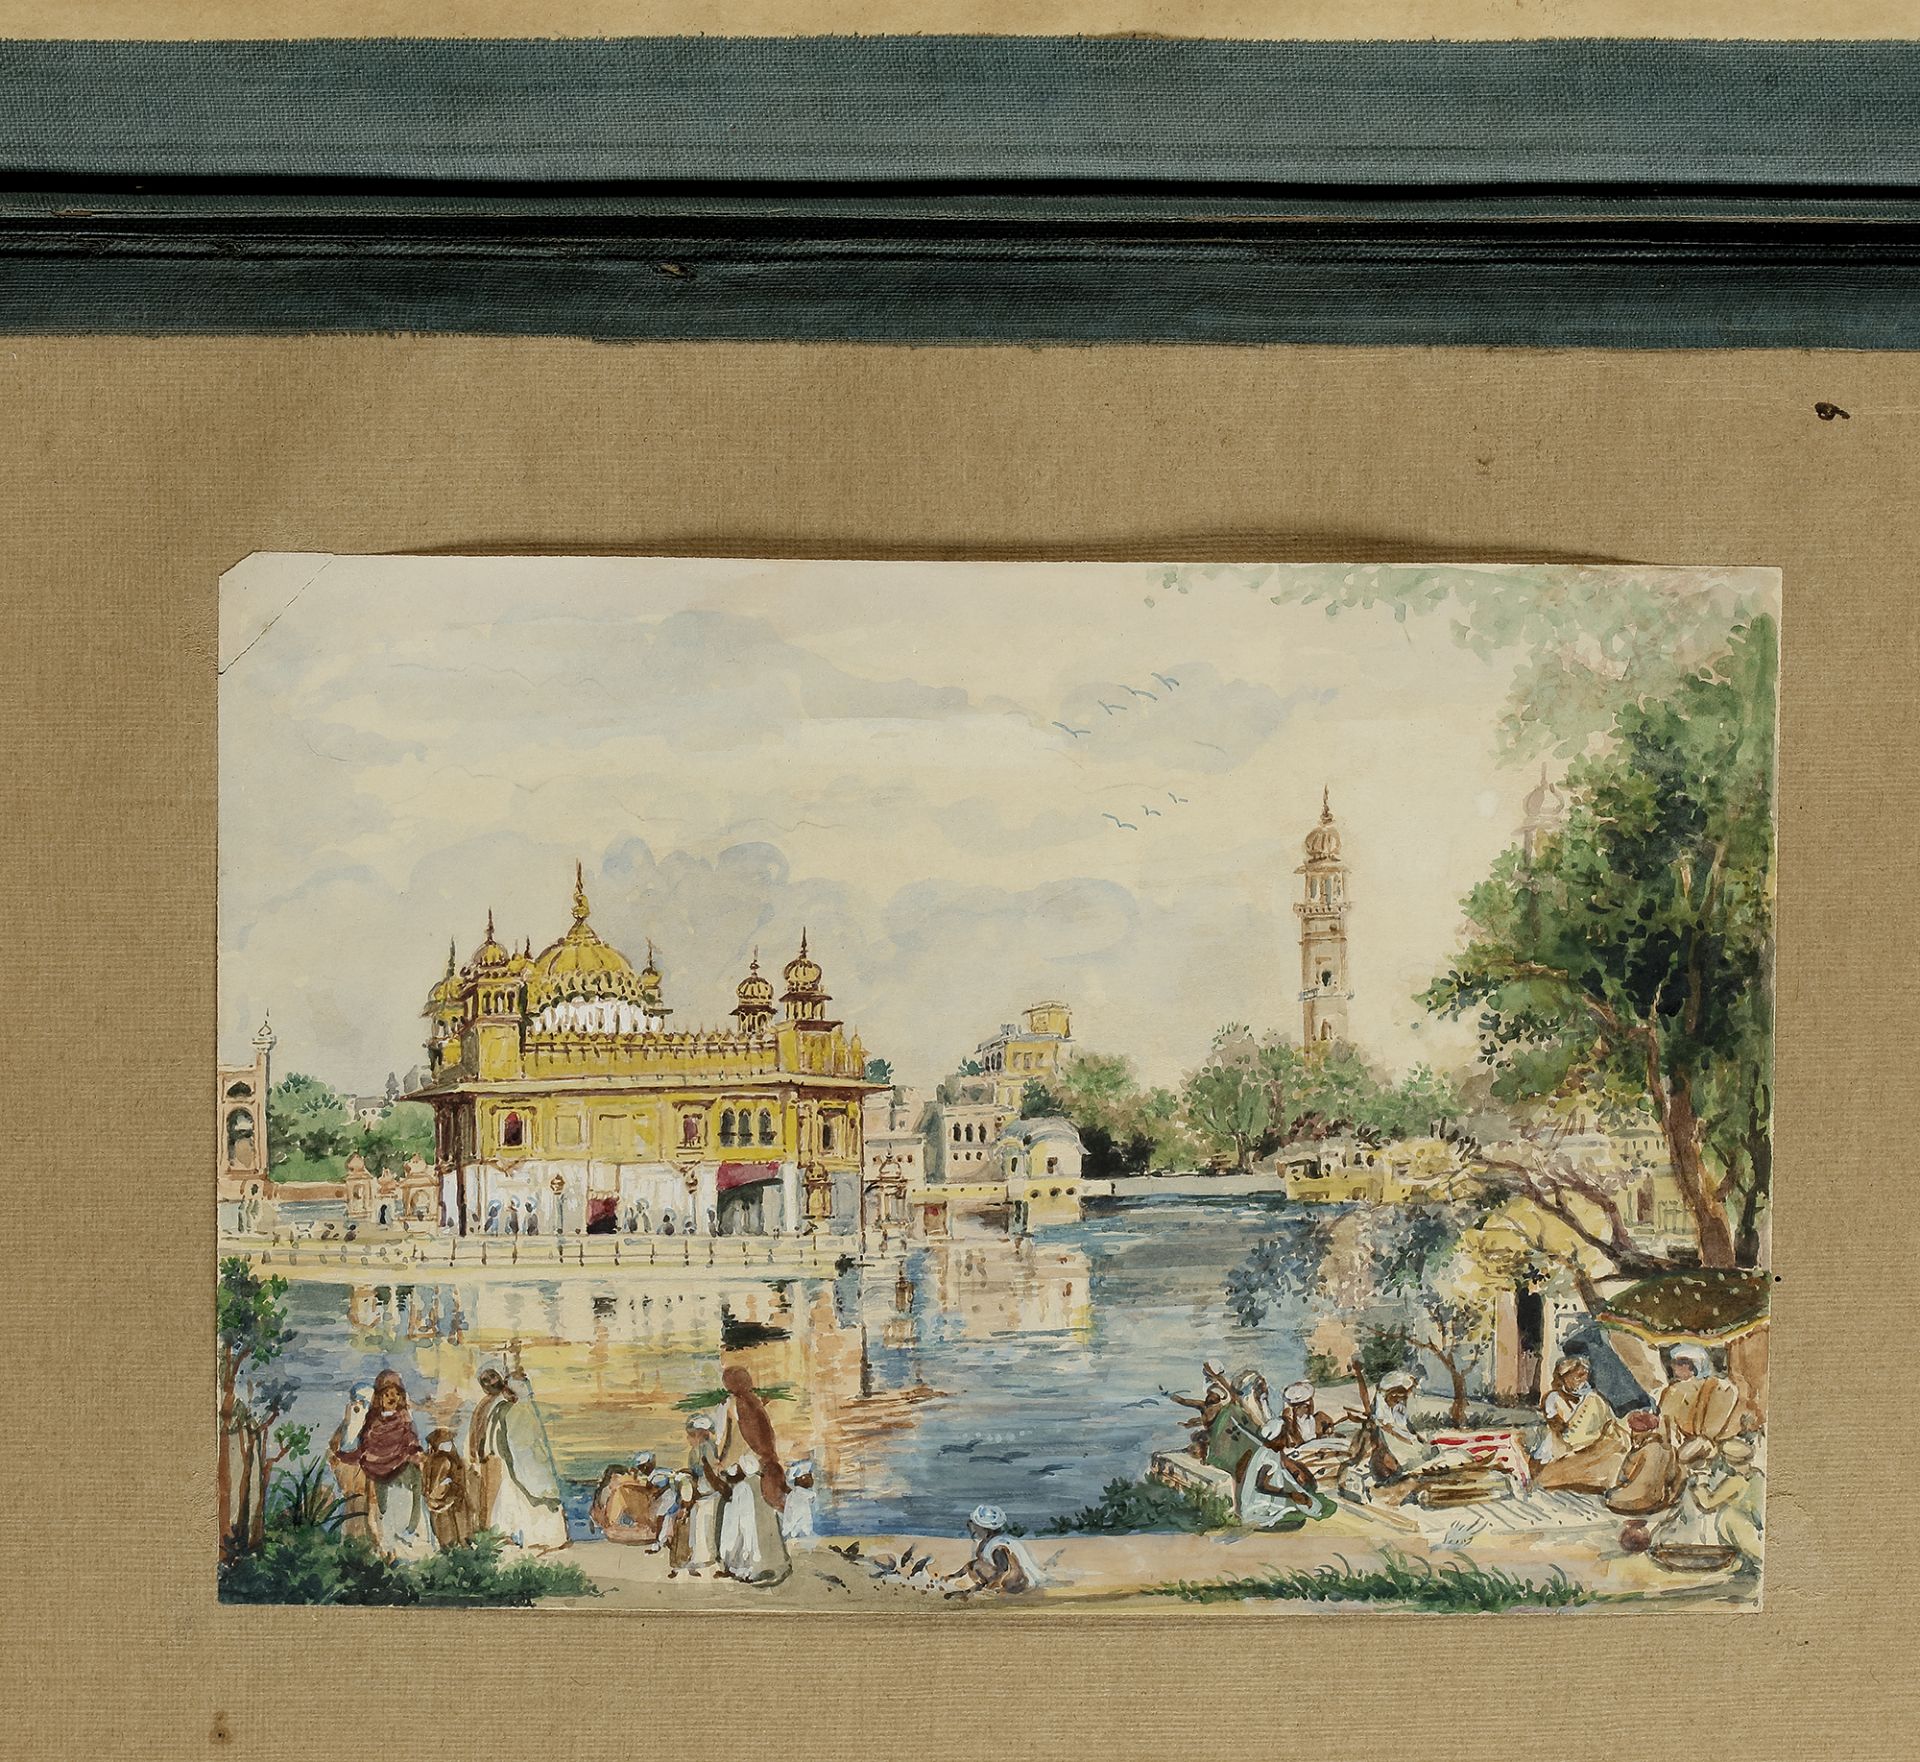 VIEWS OF THE GOLDEN TEMPLE AT AMRITSAR EUROPEAN SCHOOL, 19TH CENTURY - Image 2 of 10